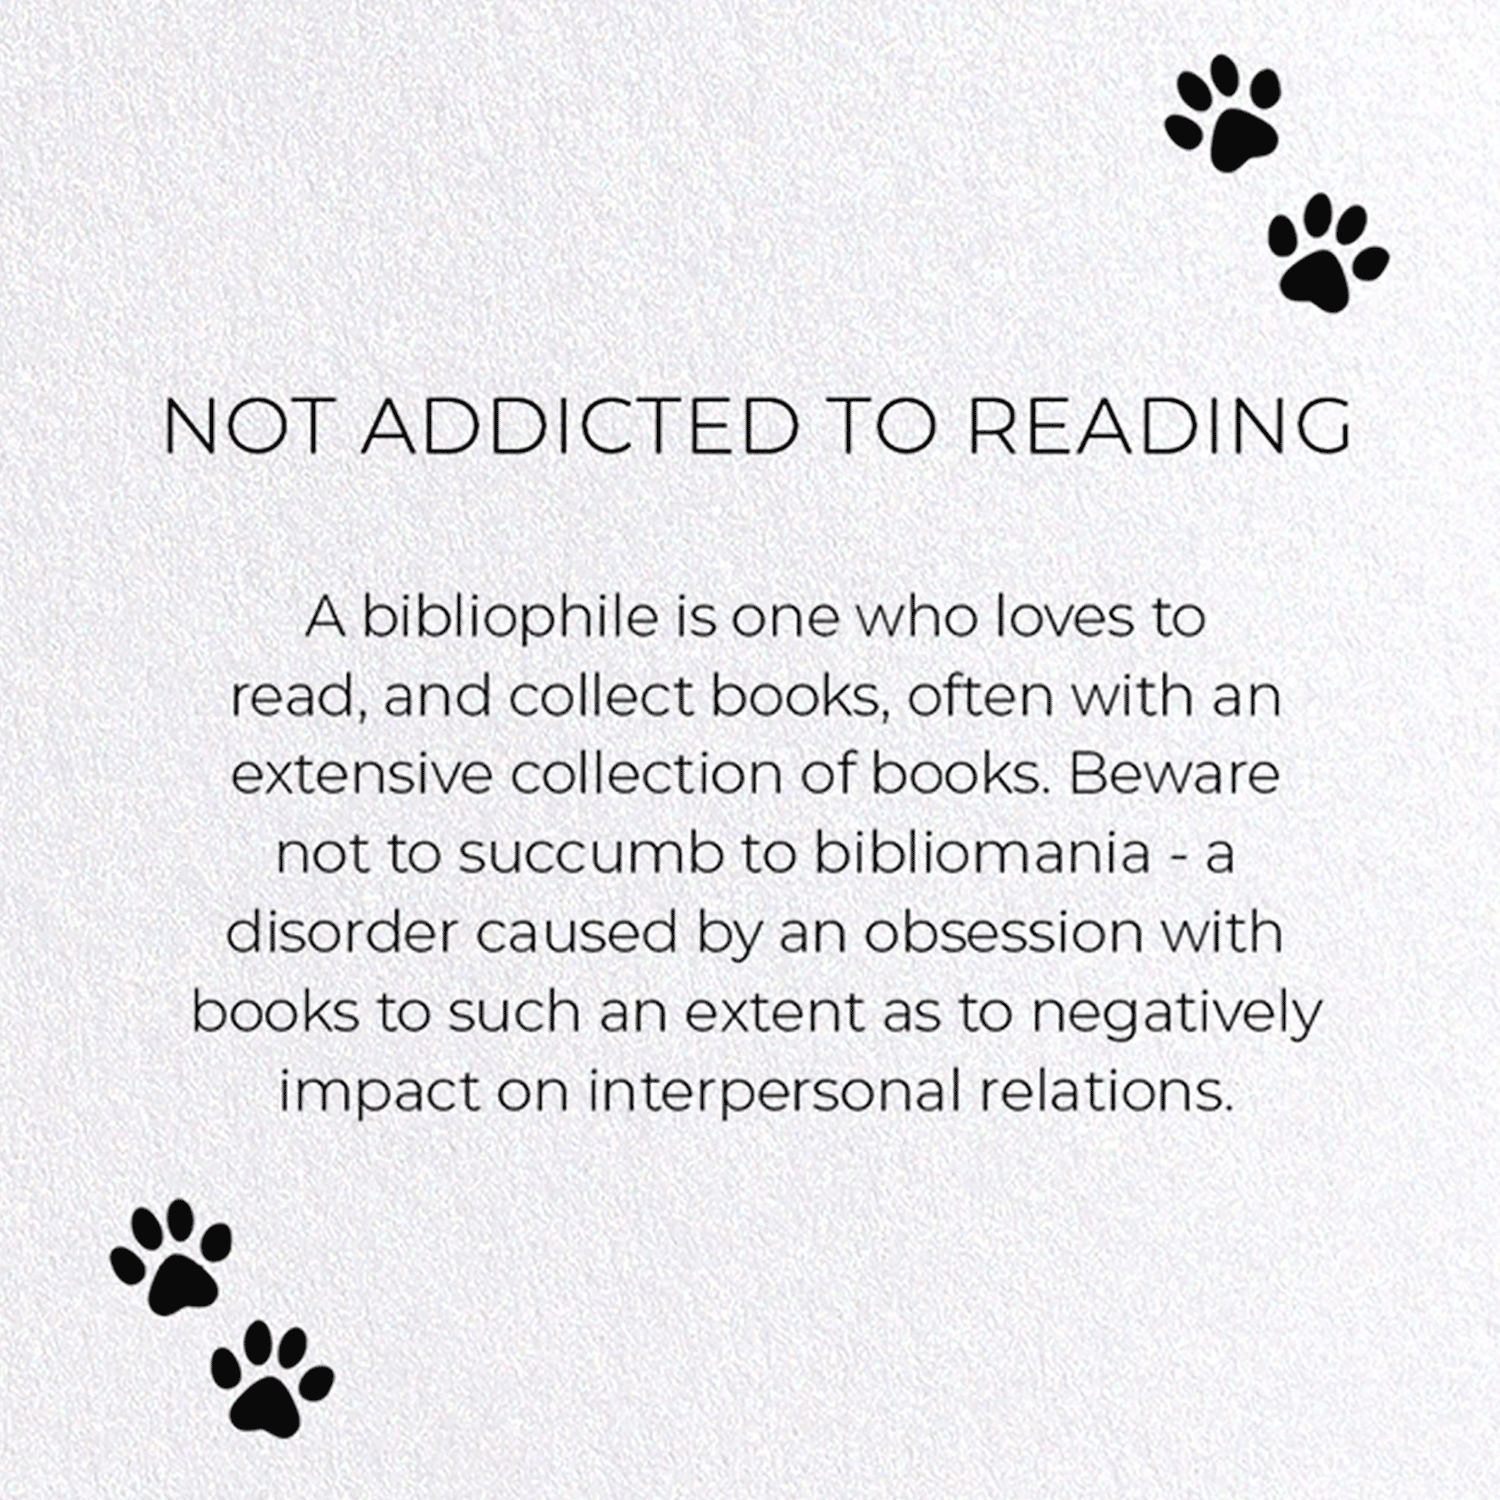 NOT ADDICTED TO READING